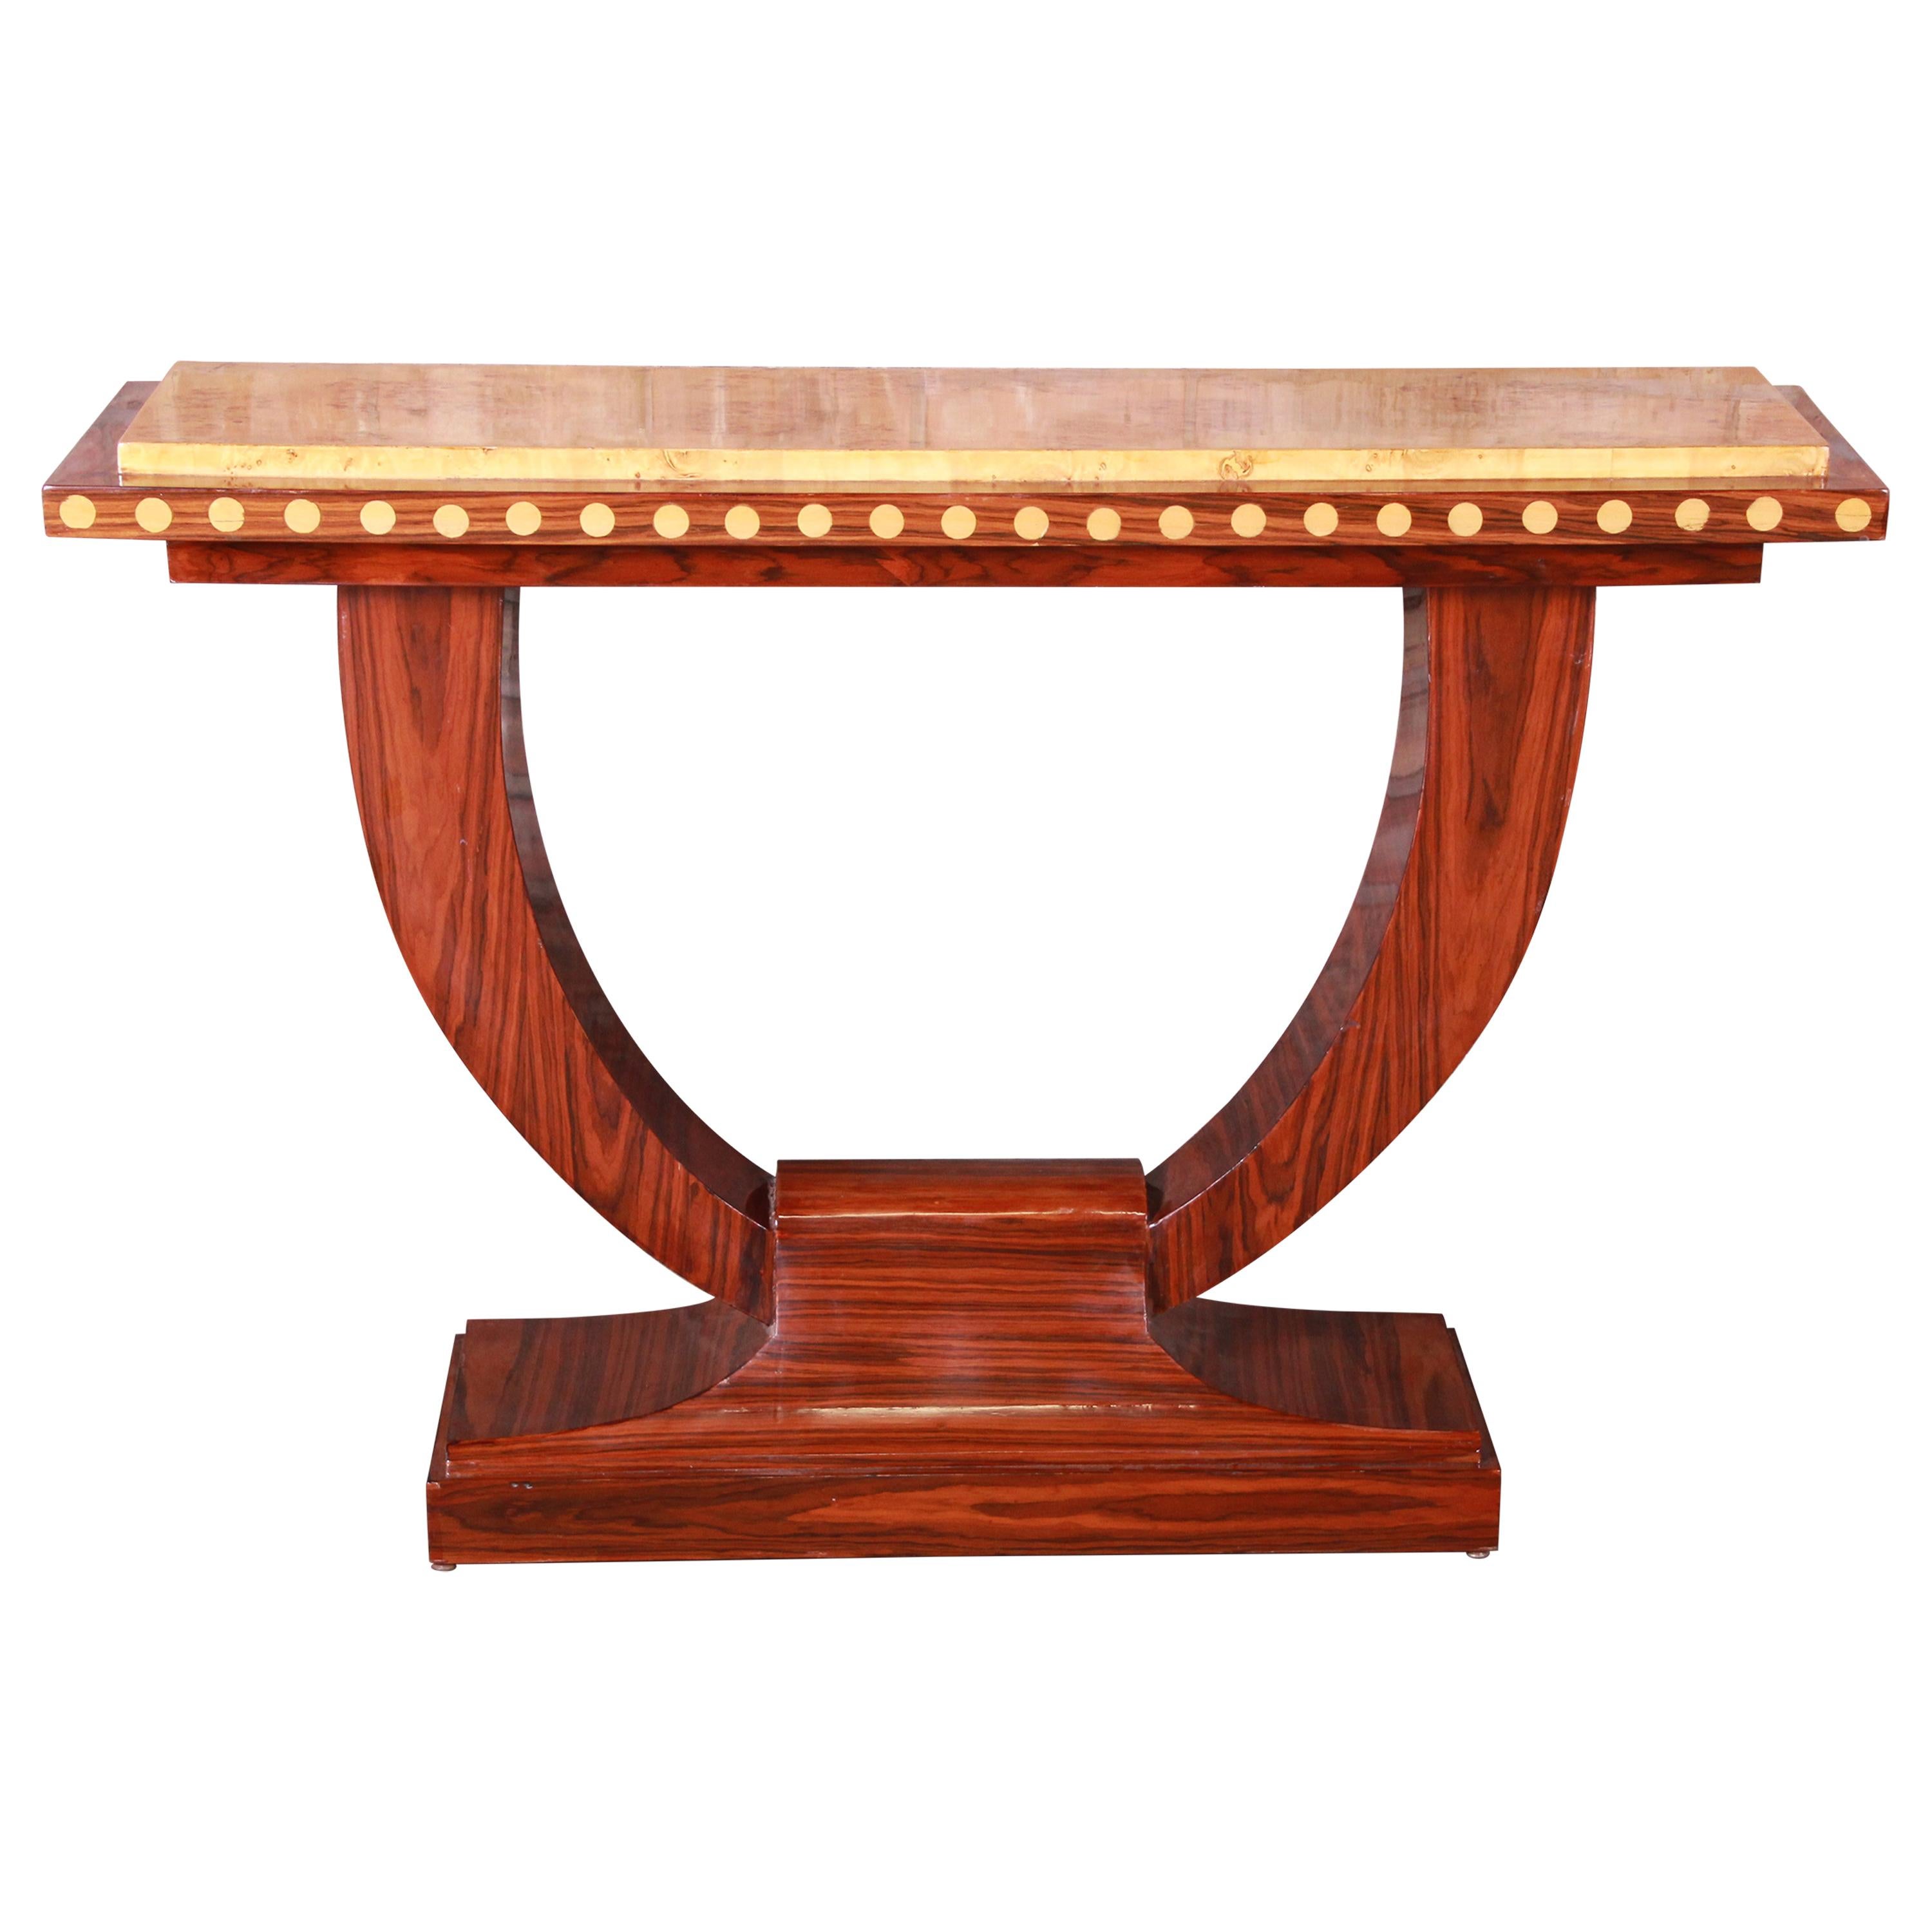 French Art Deco Rosewood and Burled Olive Wood Console Table, circa 1930s